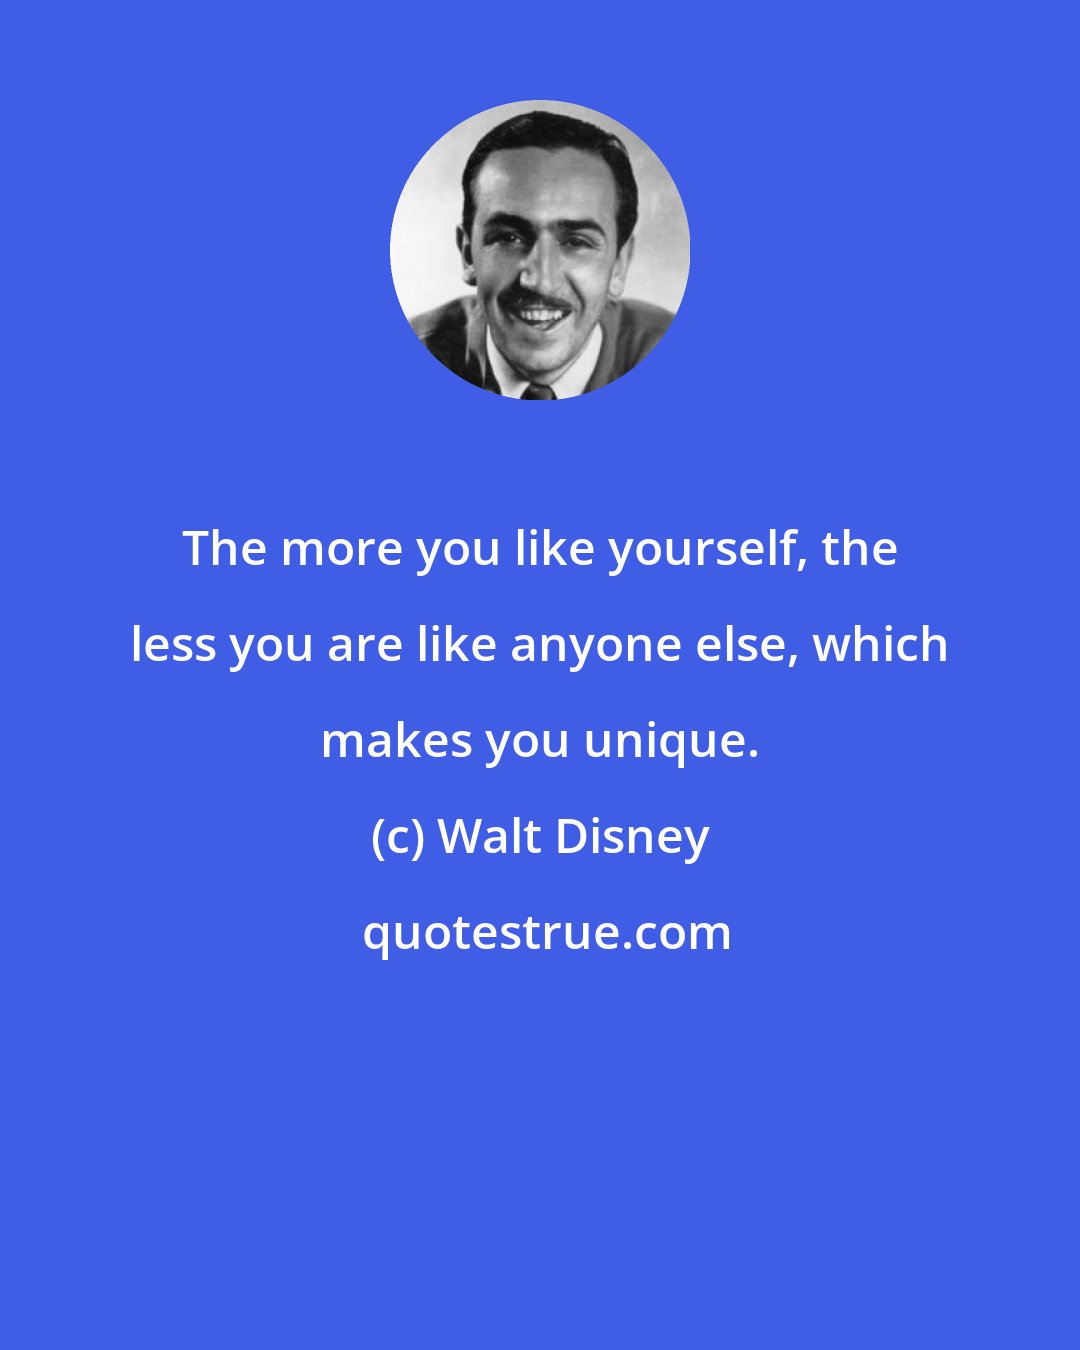 Walt Disney: The more you like yourself, the less you are like anyone else, which makes you unique.